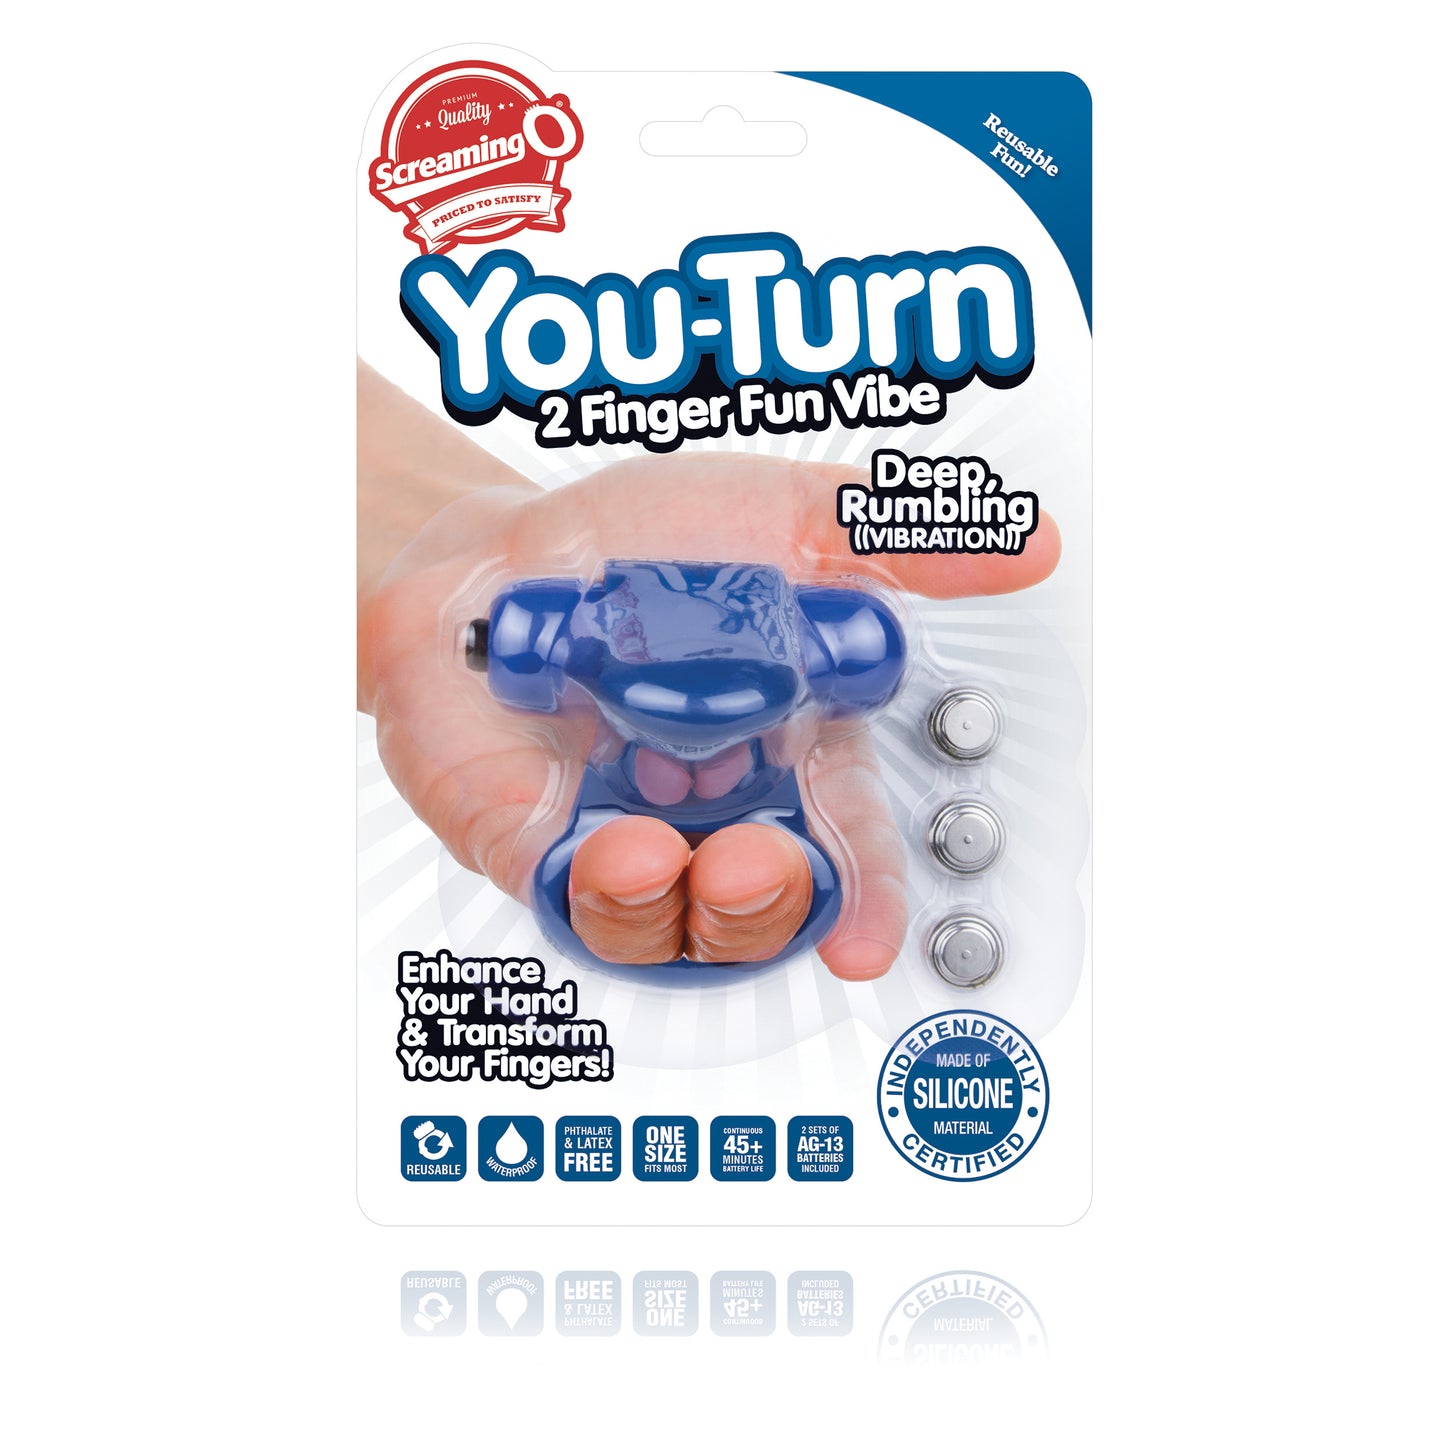 You-Turn 2 Finger Fun Vibe - Blueberry